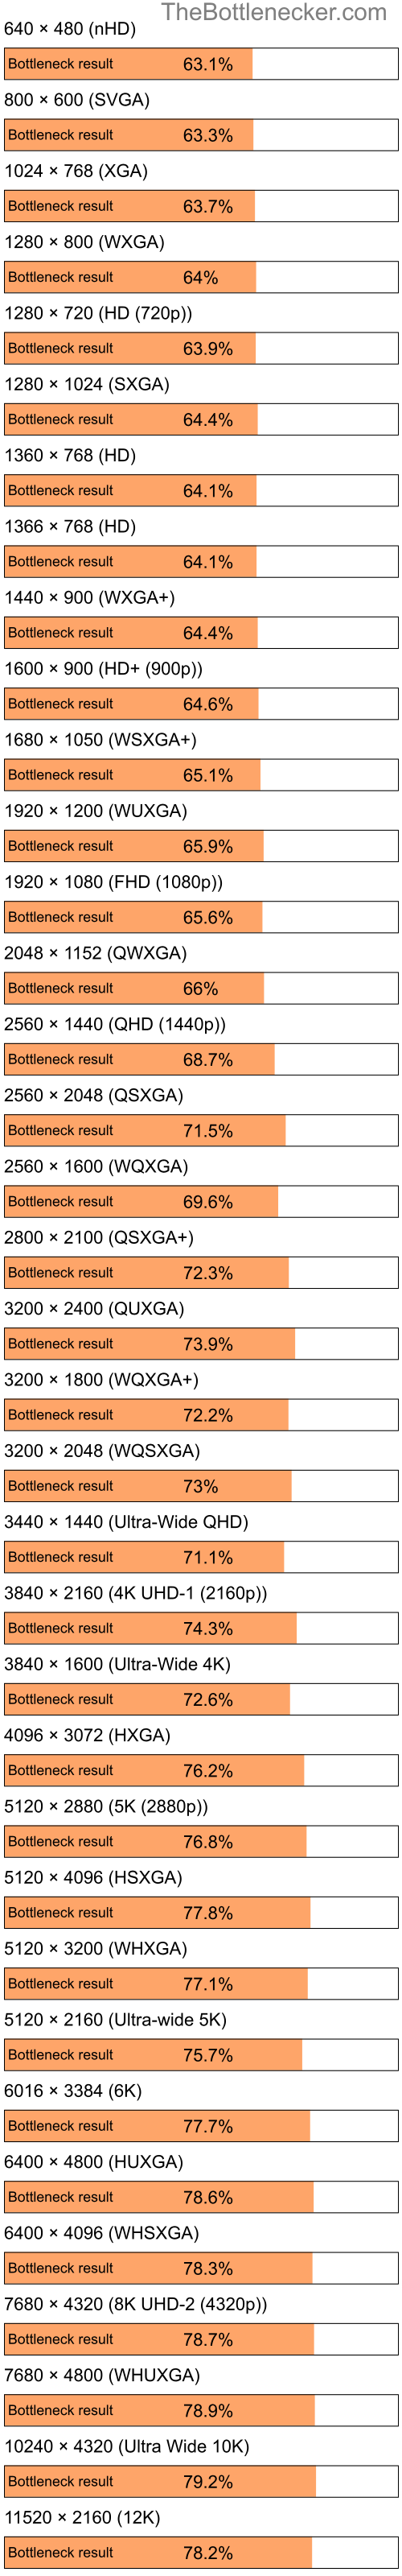 Bottleneck results by resolution for Intel Pentium 4 and AMD Radeon HD 6250 in General Tasks